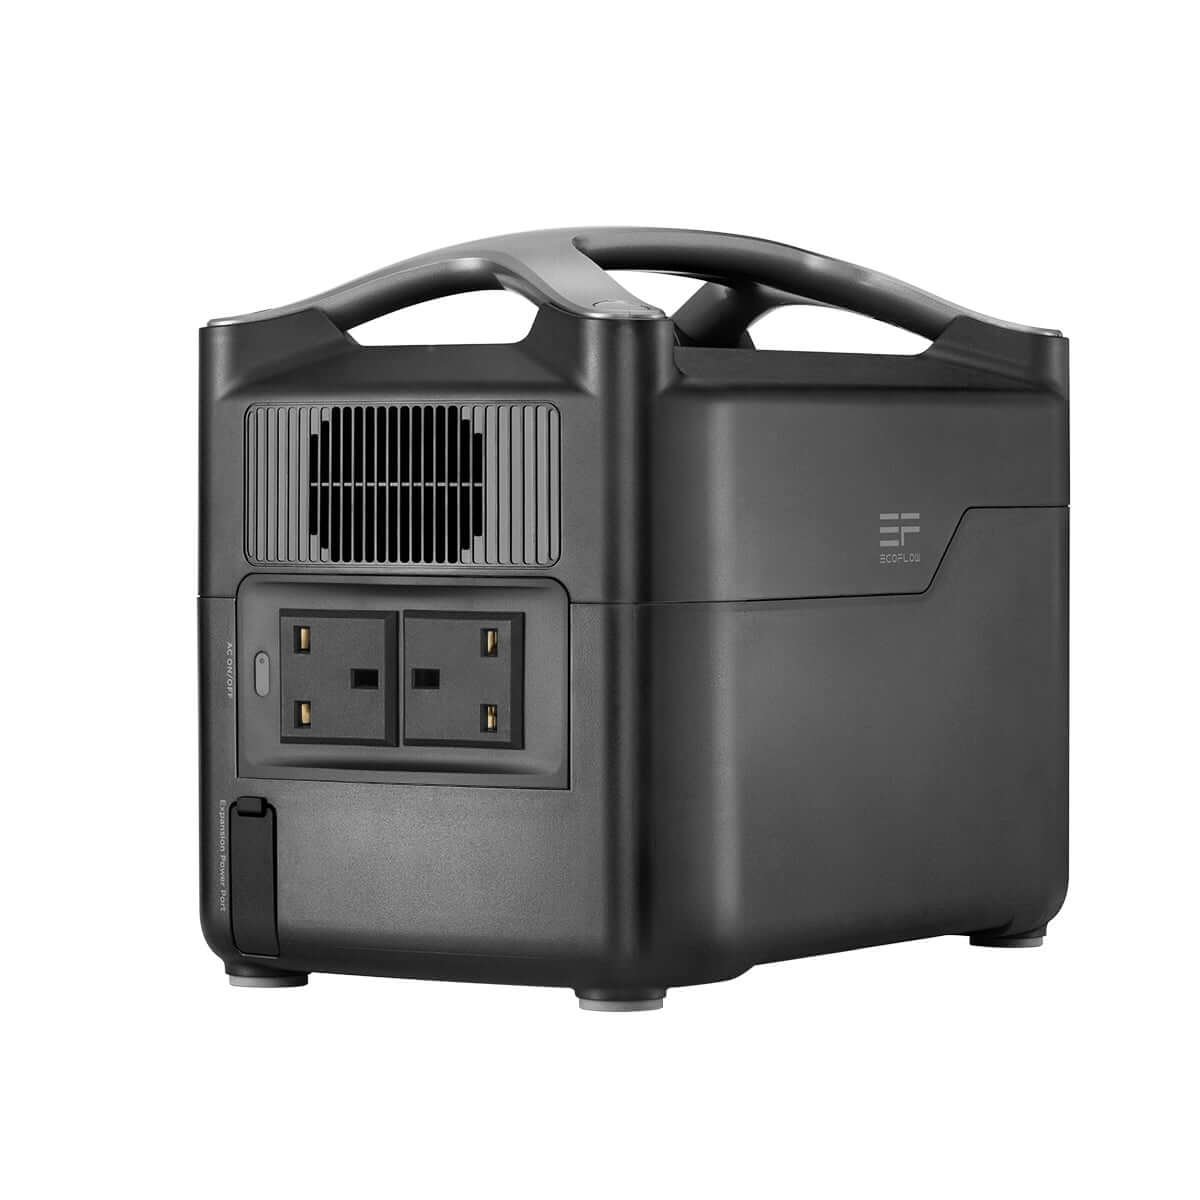 The EcoFlow RIVER Pro - 720Wh Portable Power Station is a portable power station with a handle, three socket outlets, and a modern black design.